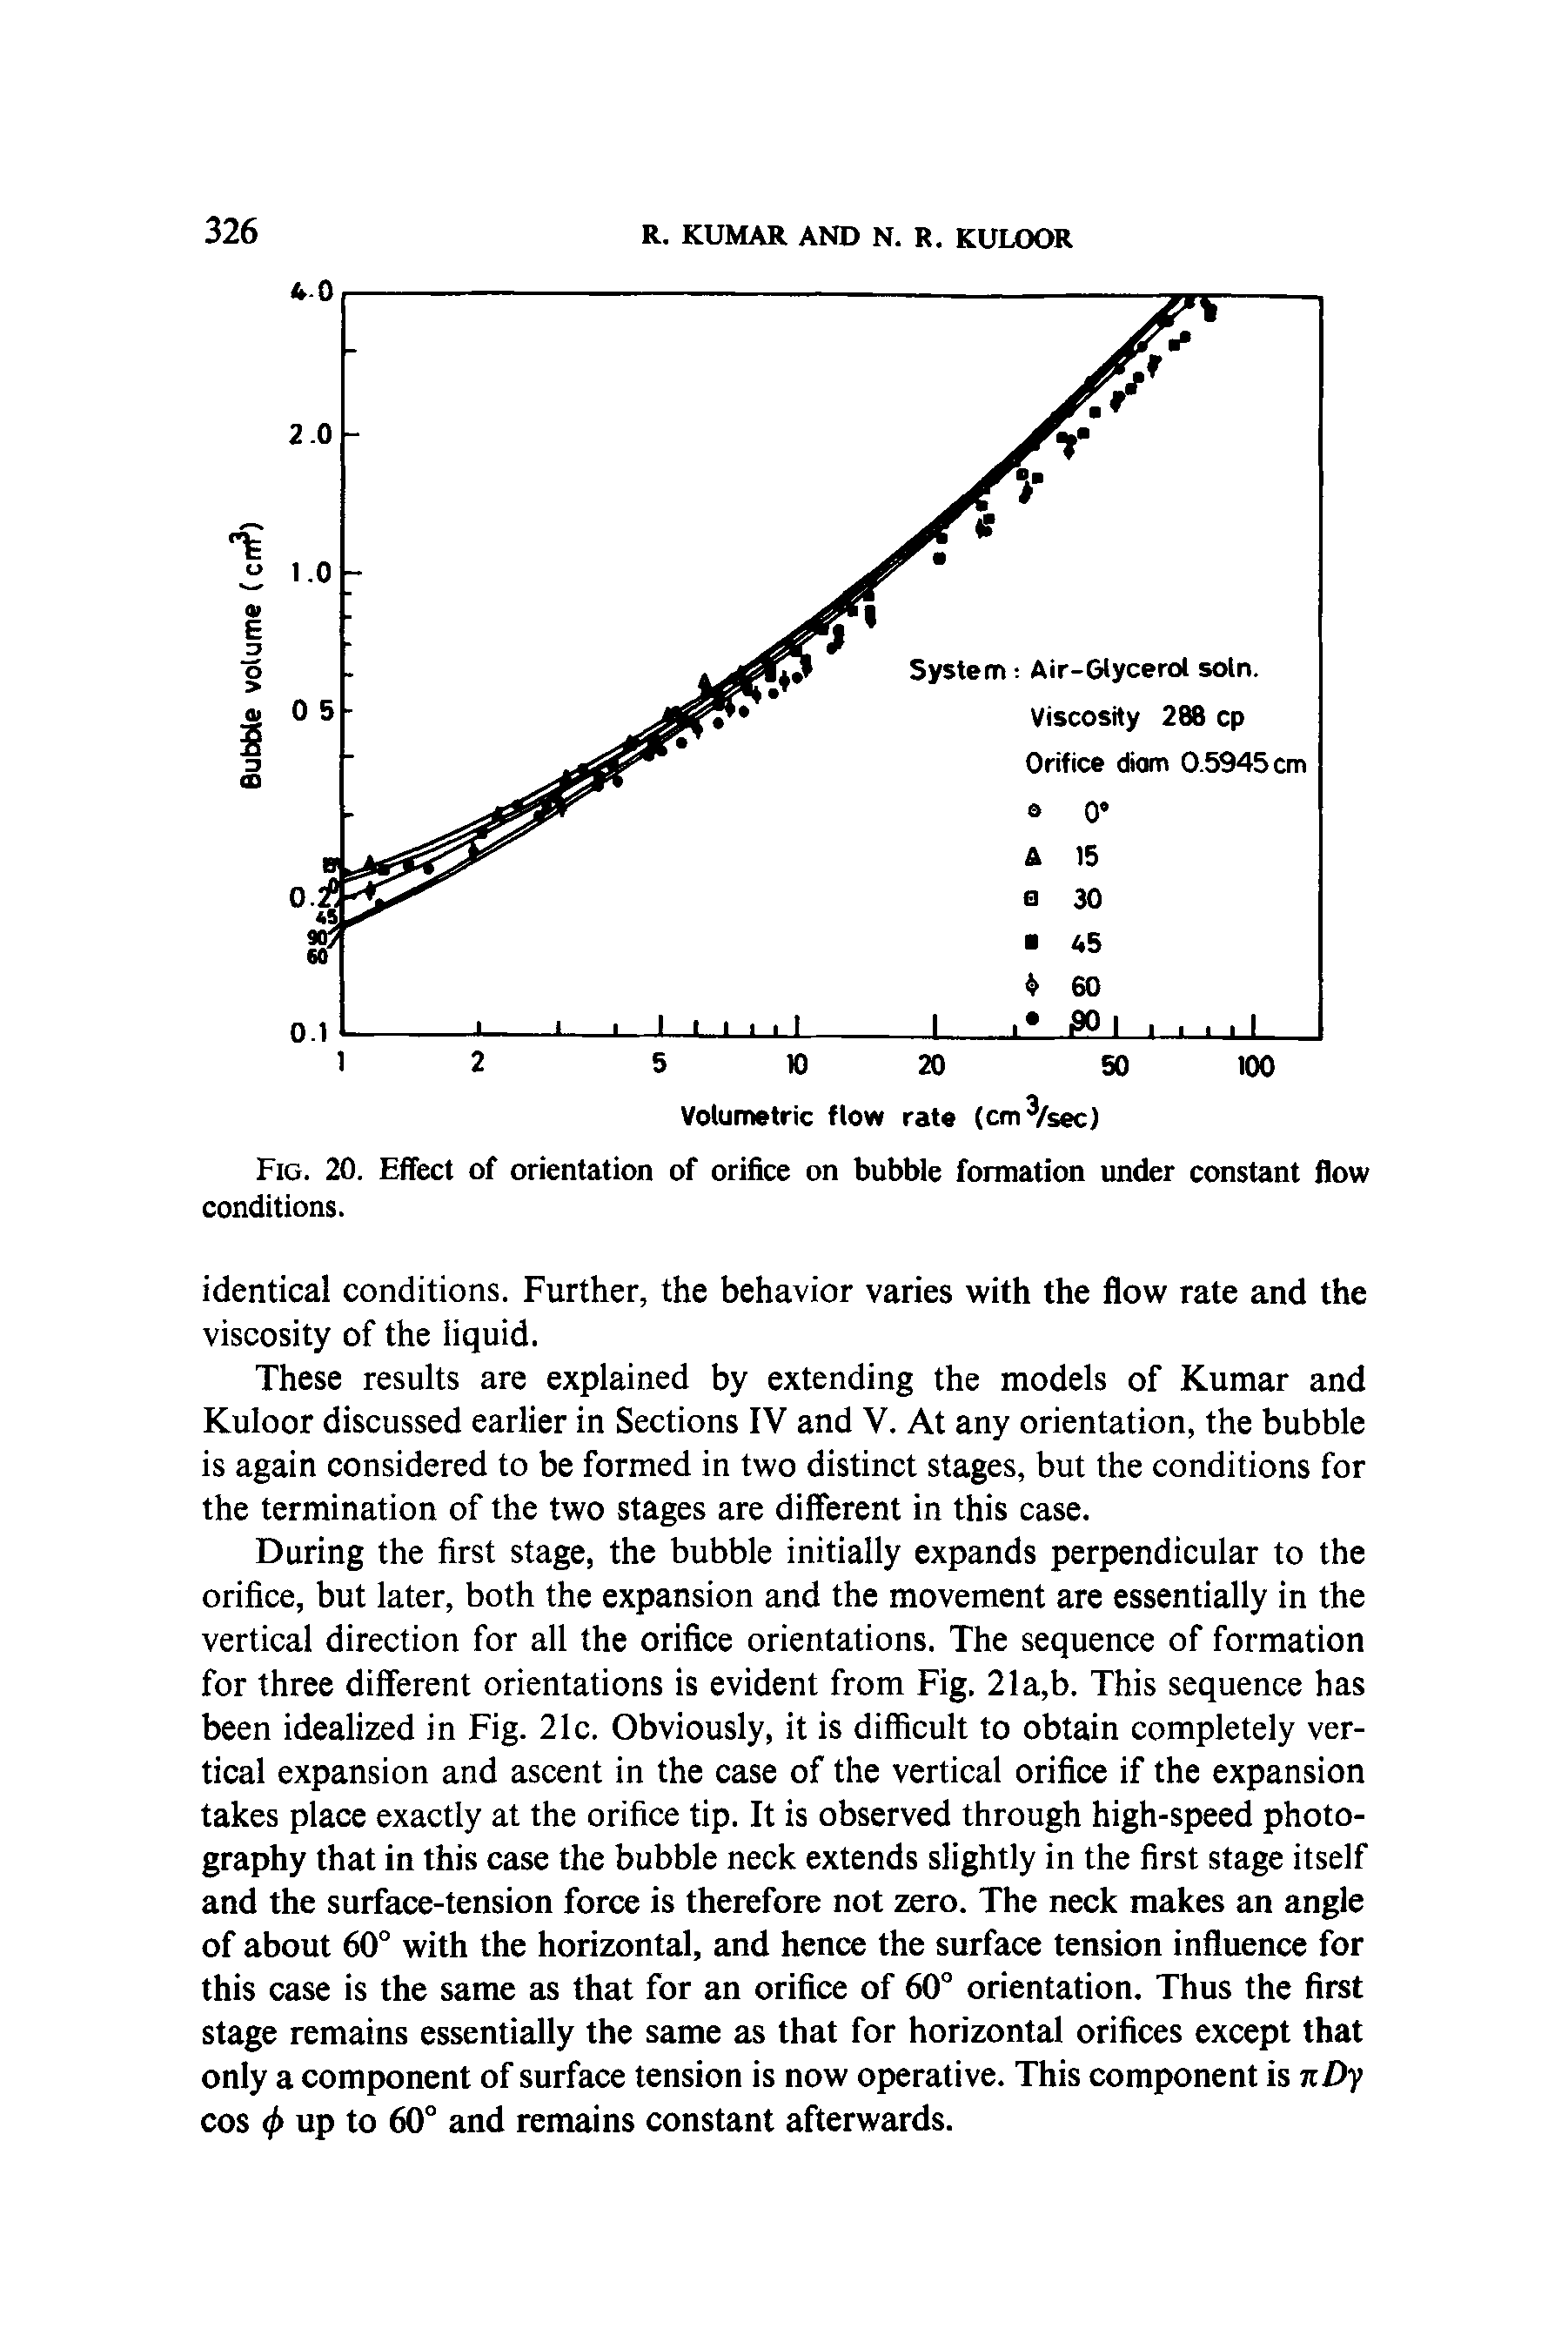 Fig. 20. Effect of orientation of orifice on bubble formation under constant flow conditions.